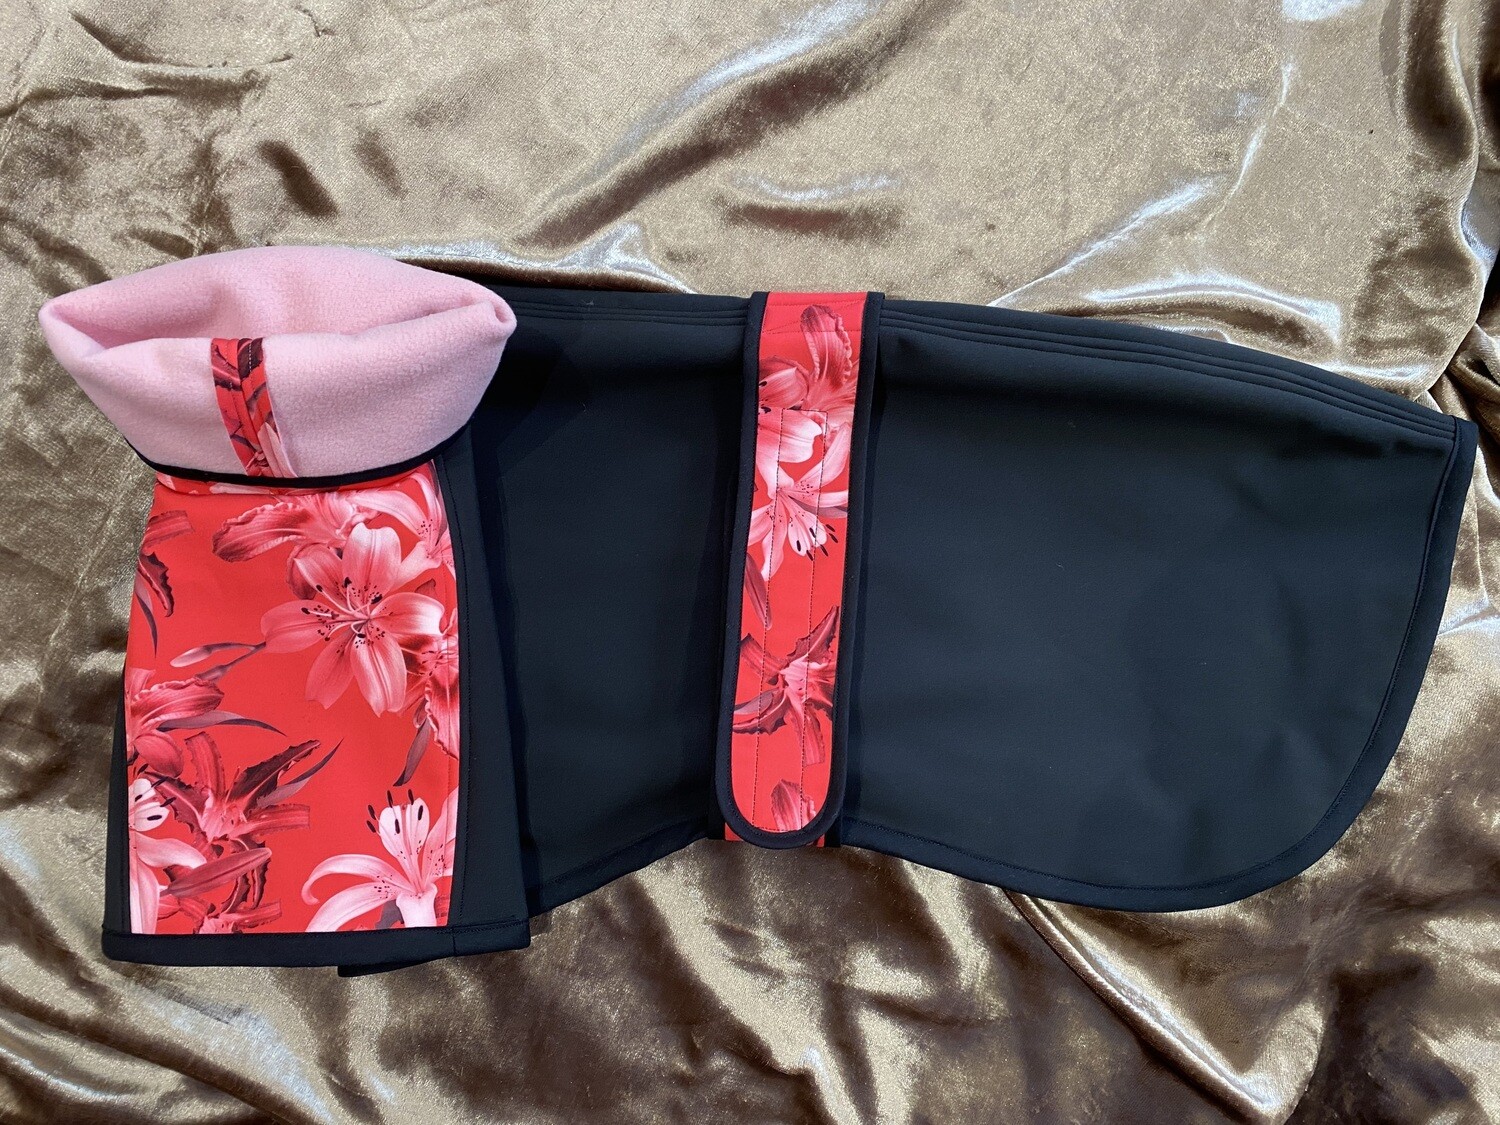 24" Fleece Lined Raincoat - Black with Reddy Pink Lilies Design - ONE OFF - AVAILABLE NOW!